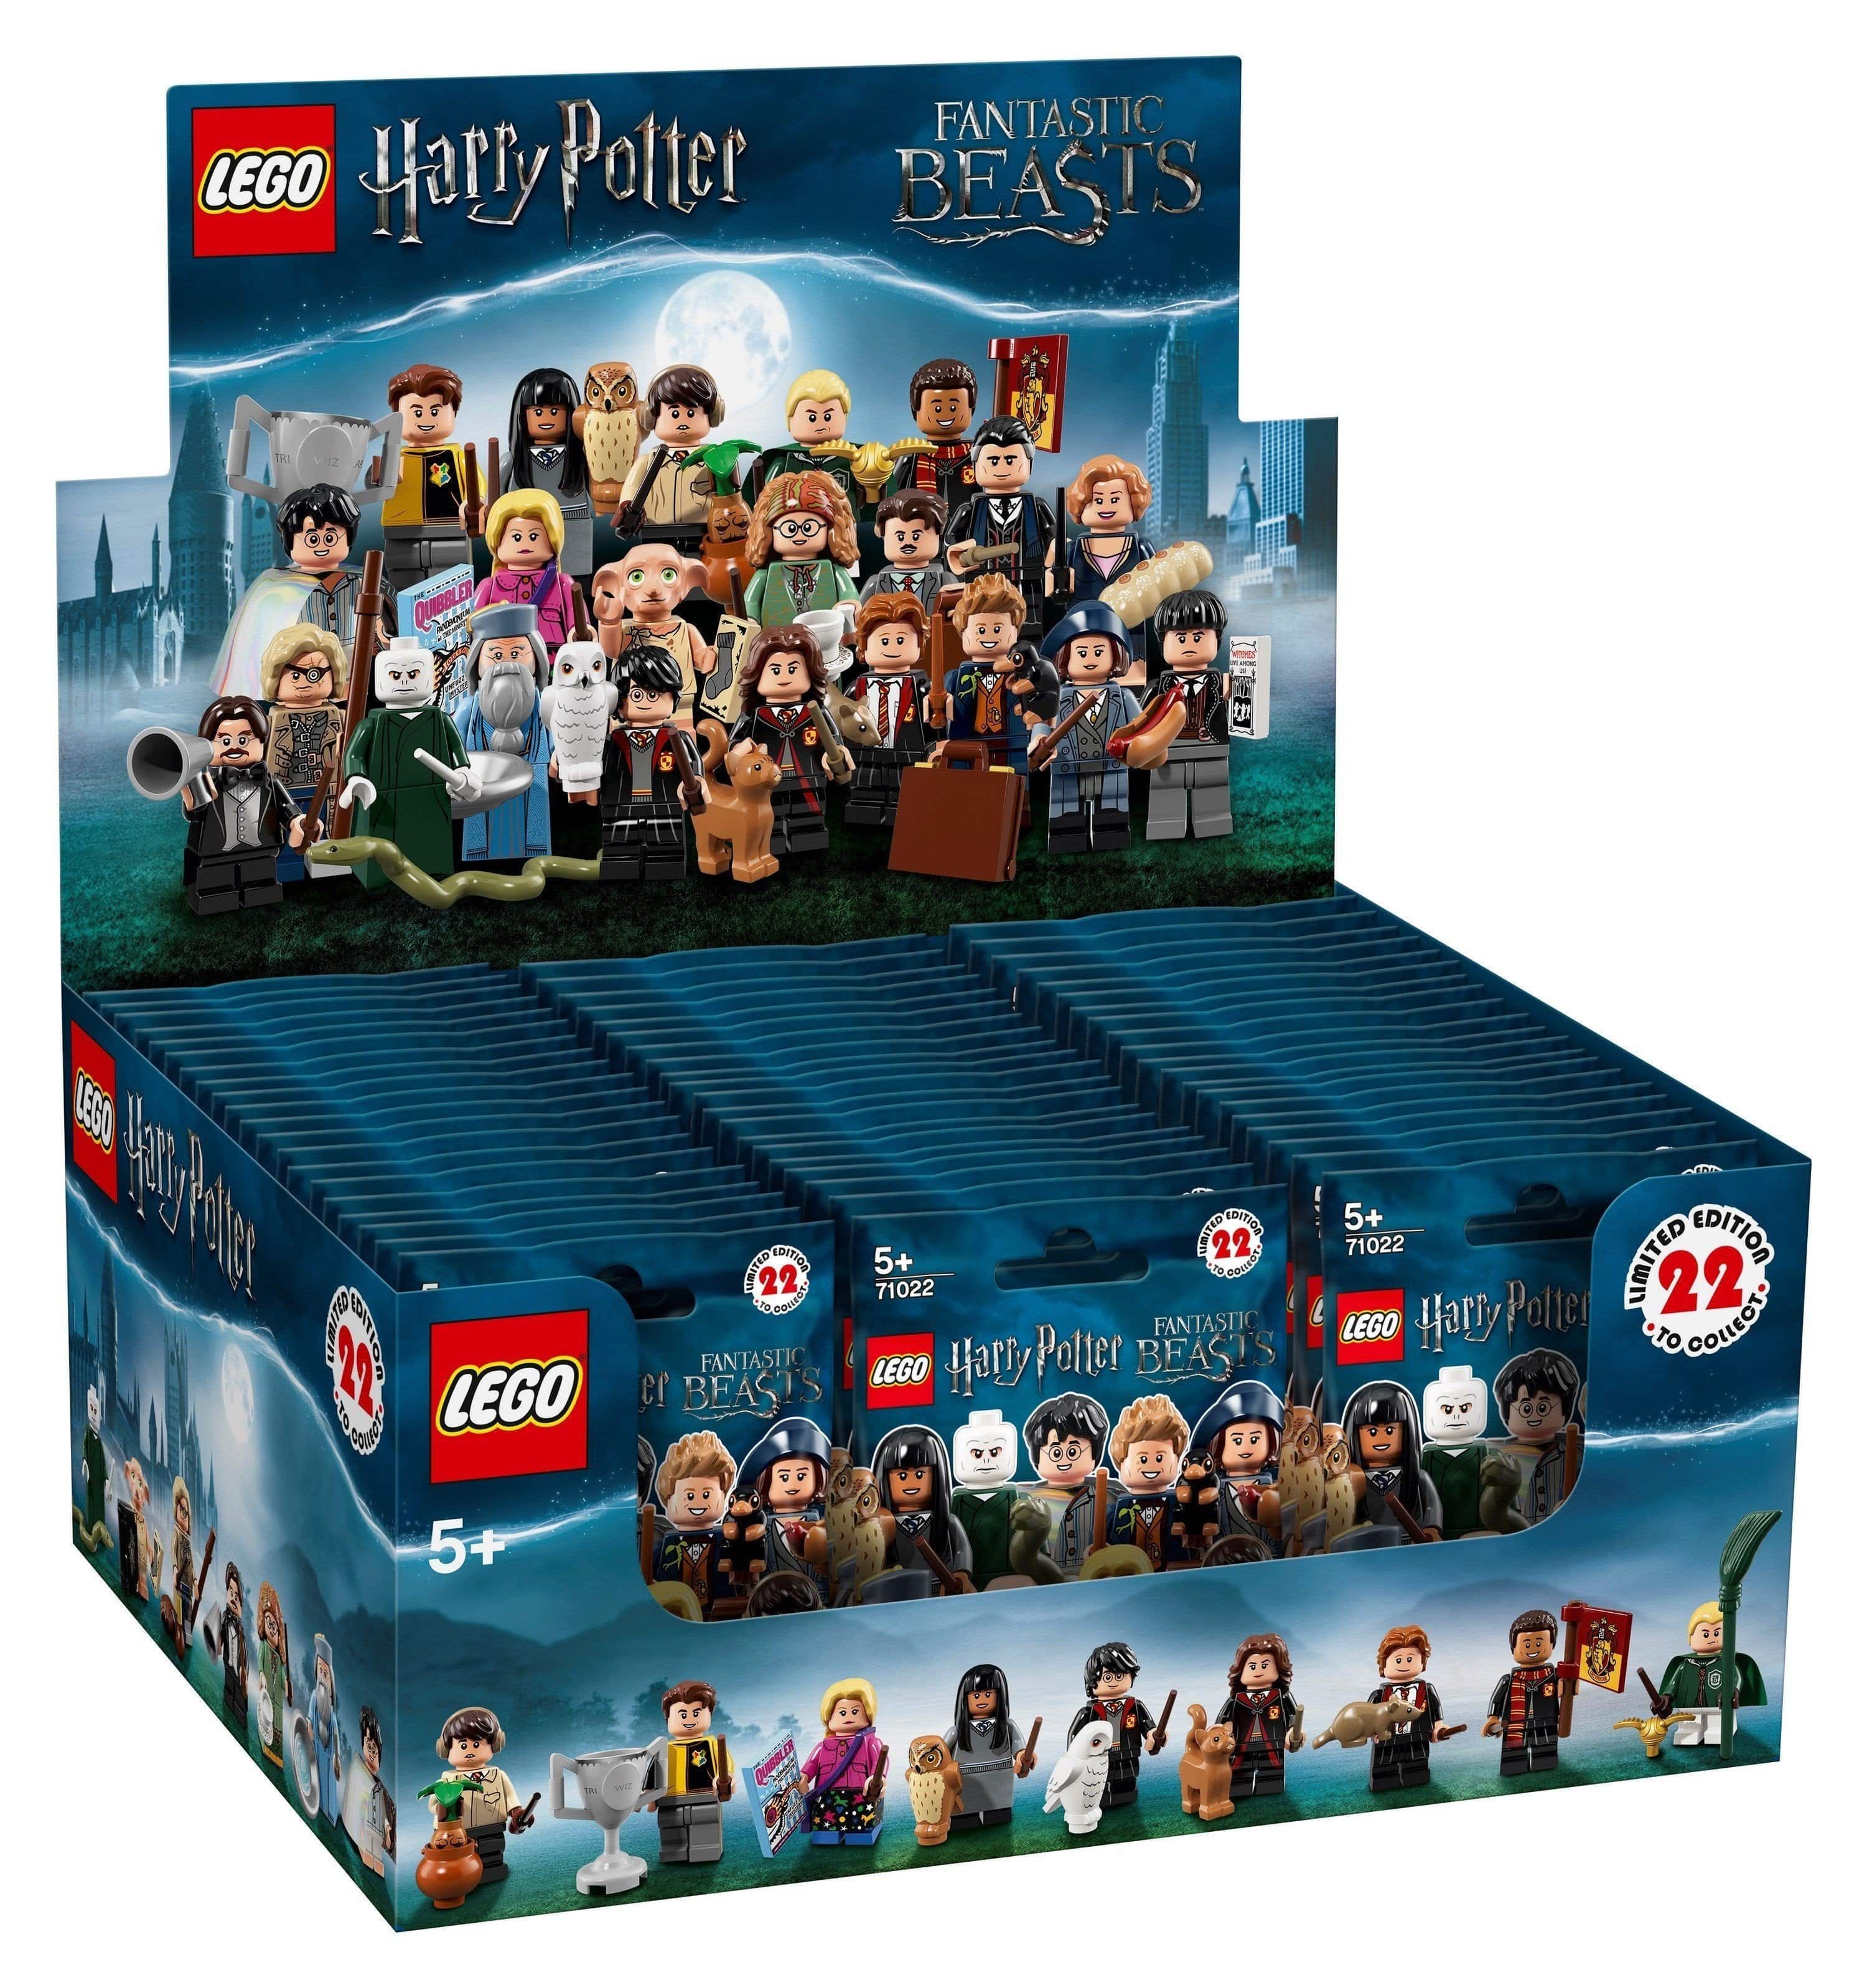 Lego Minifigures Harry Potter and Fantastic Beasts 71022 - Albagame